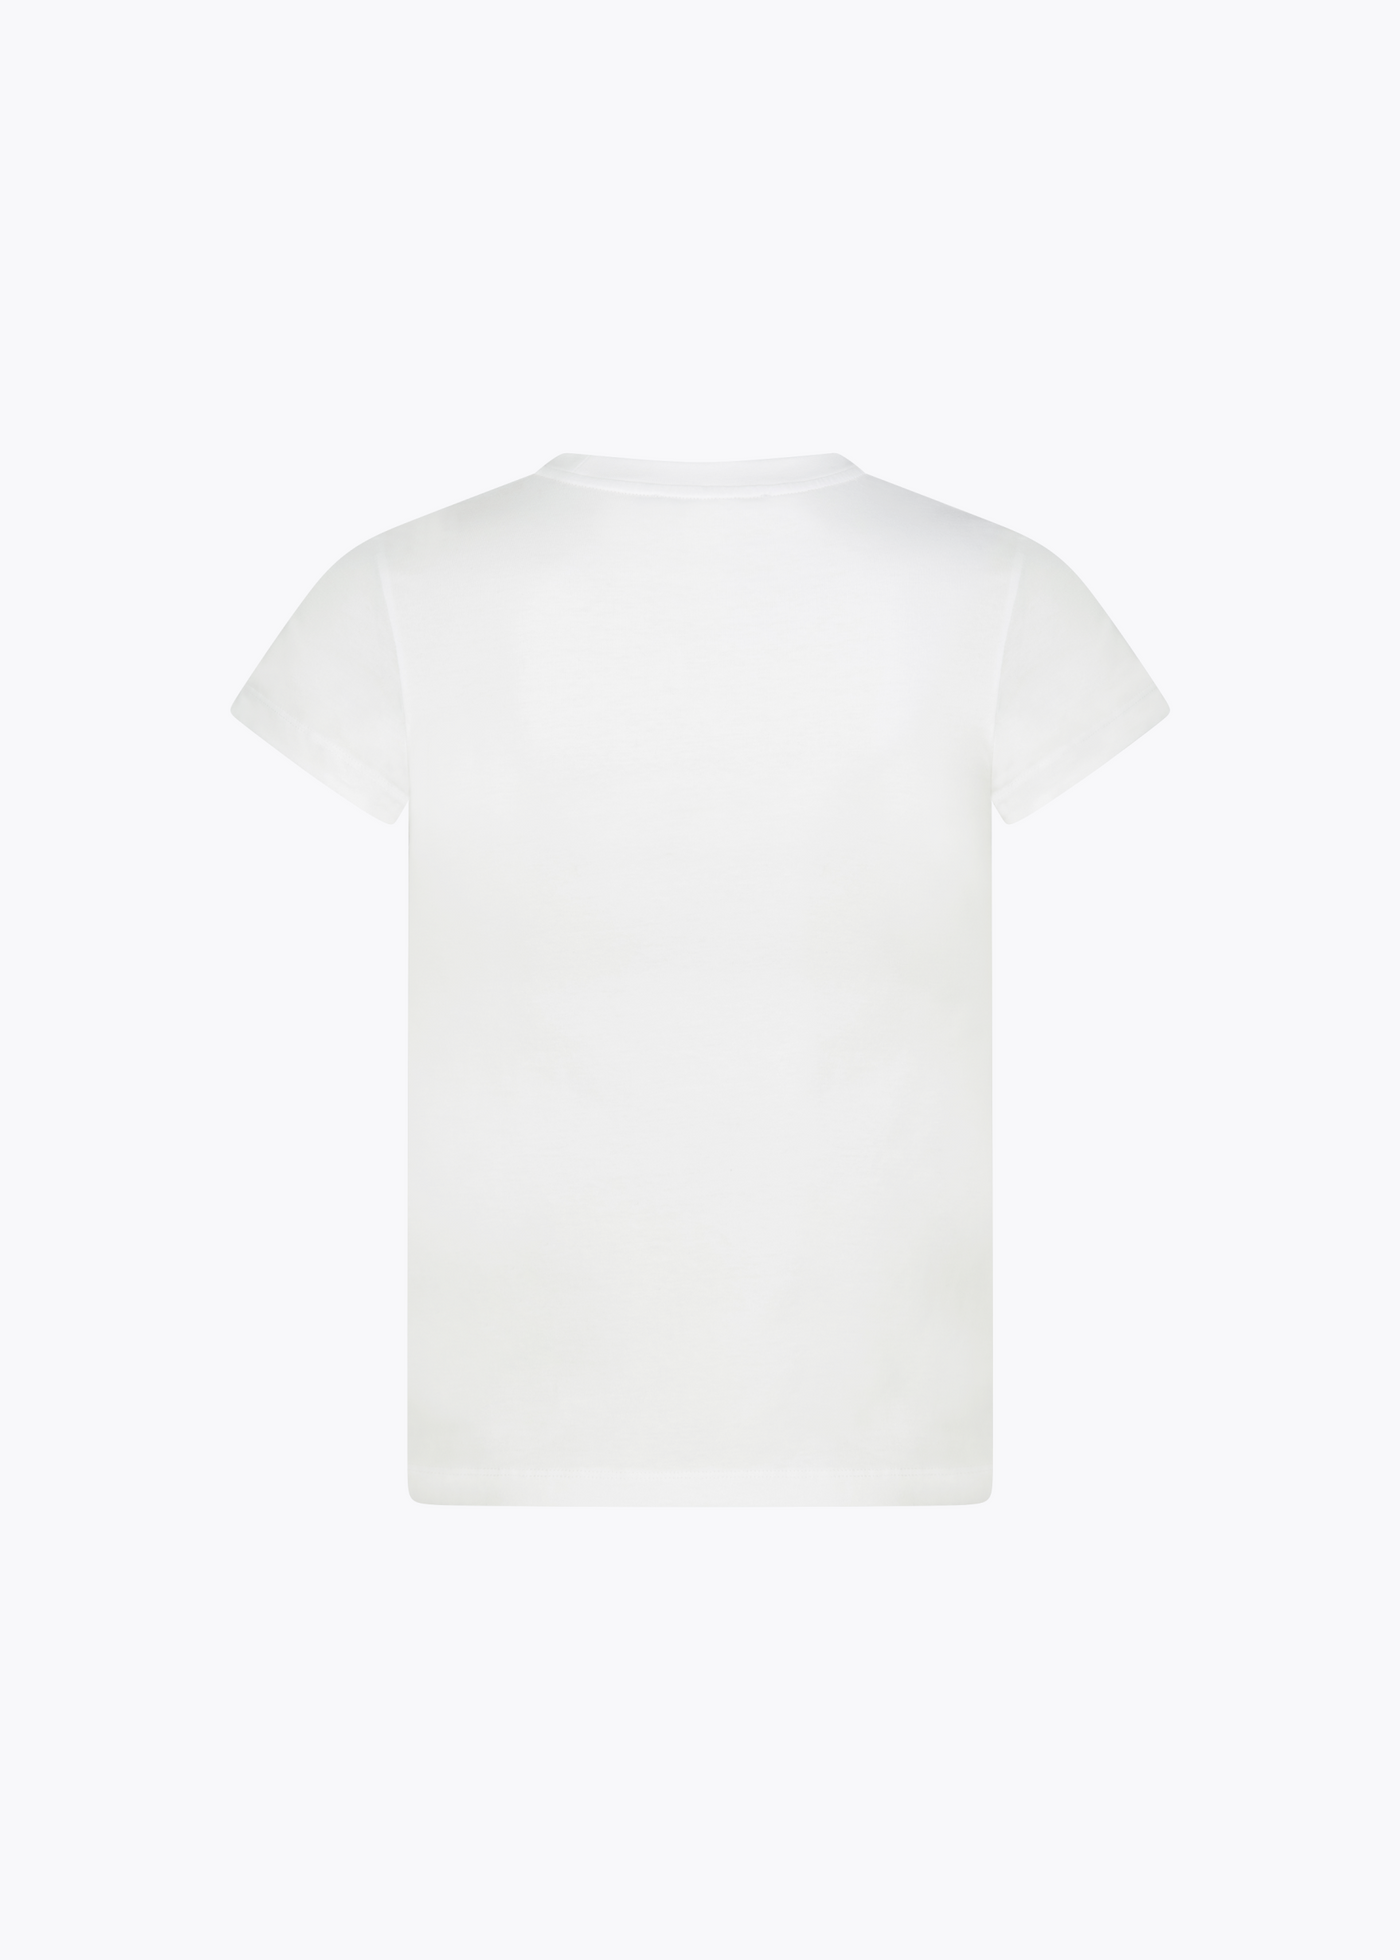 White baby tee with blue sun